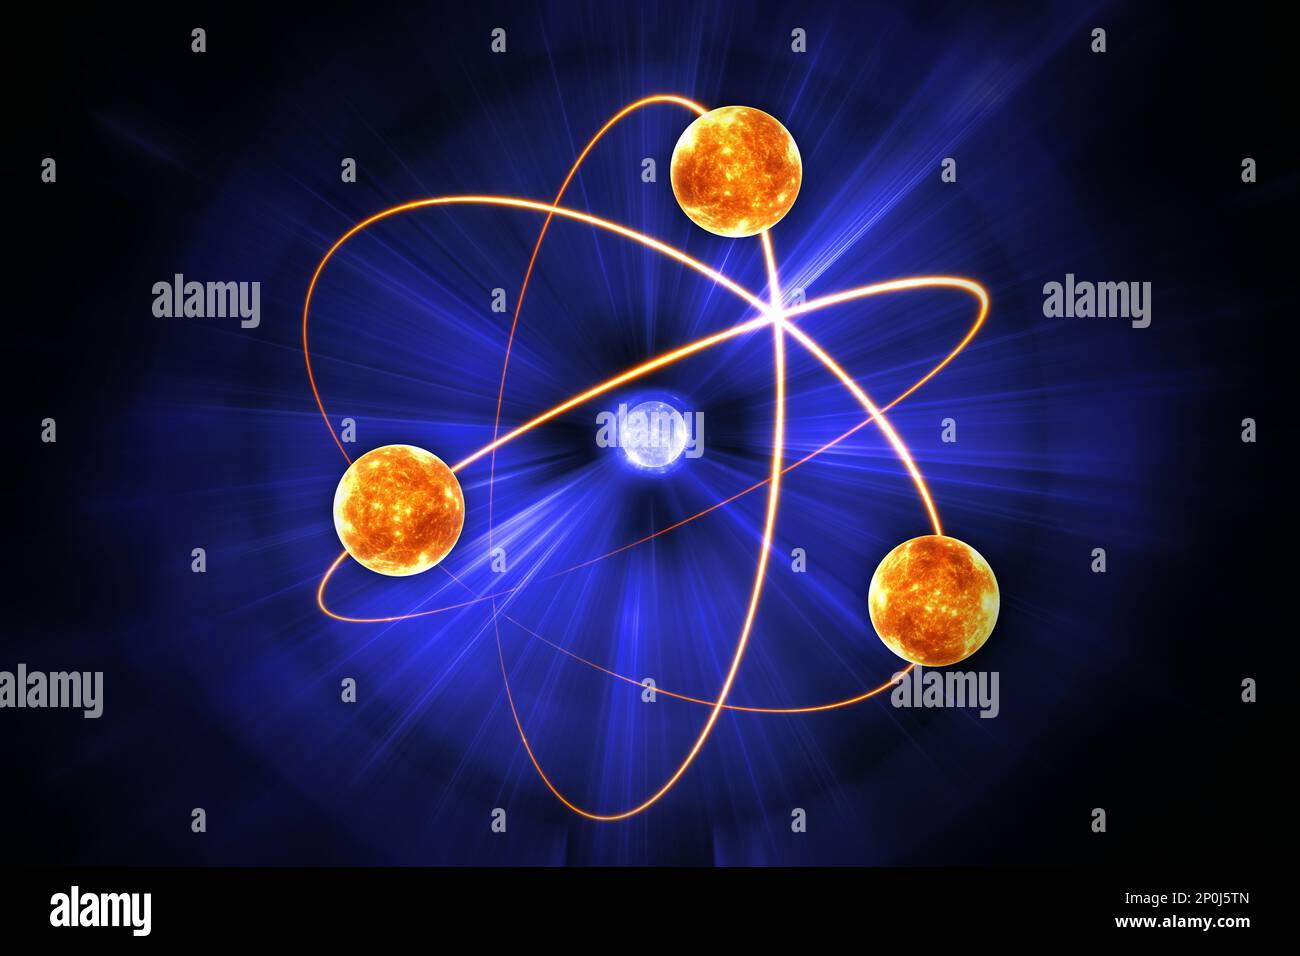 Atom model, nuclear science symbol. Three electrons rotate in orbits around atomic nucleus. 3D illustration Stock Photo